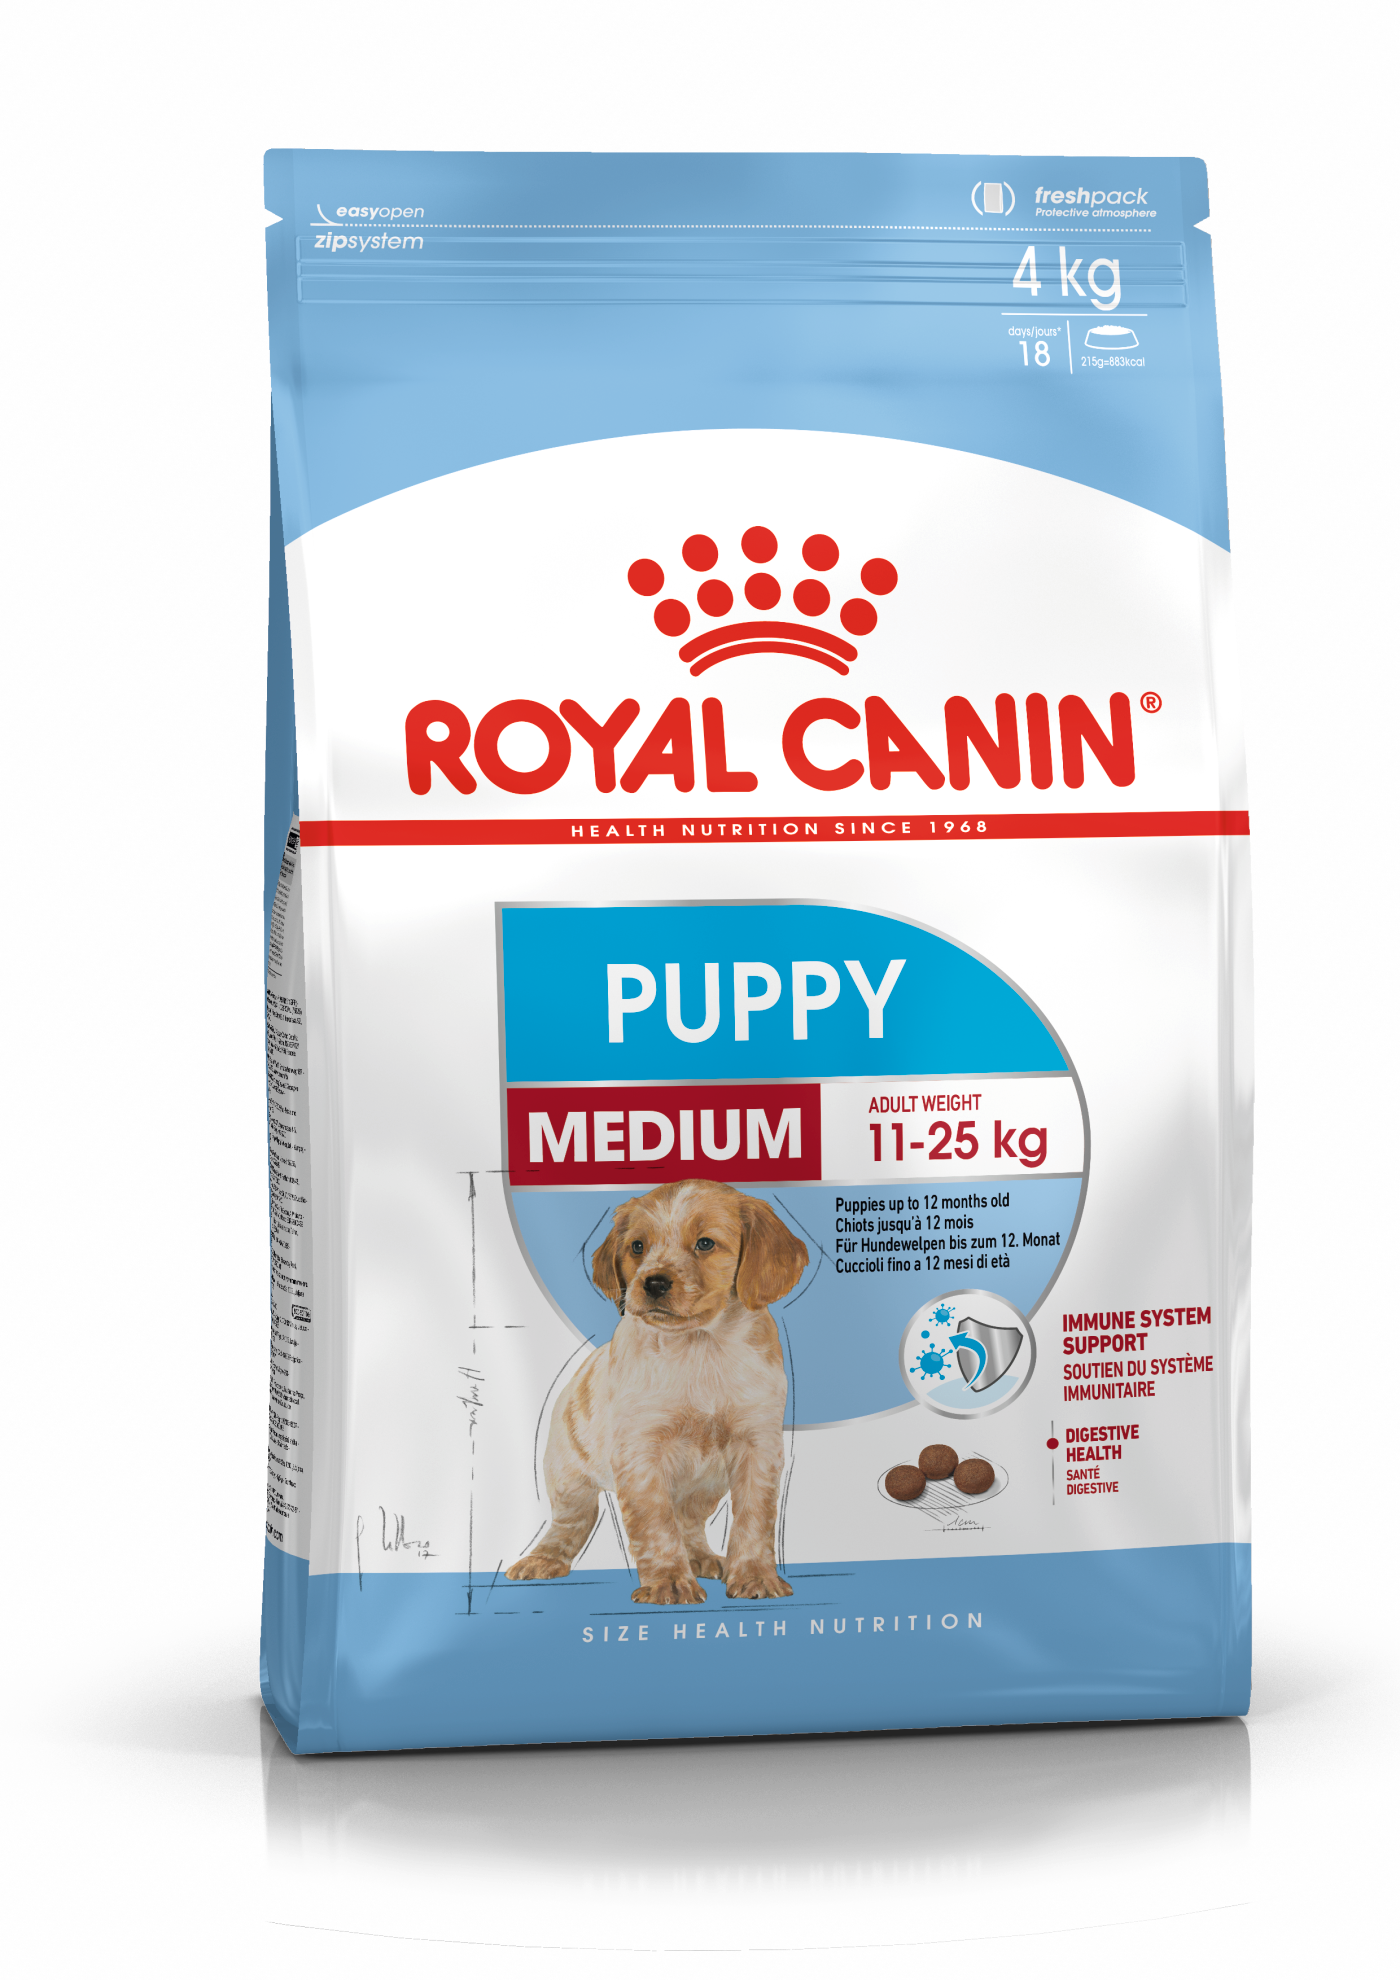 Dog Food for Puppies - Royal Canin